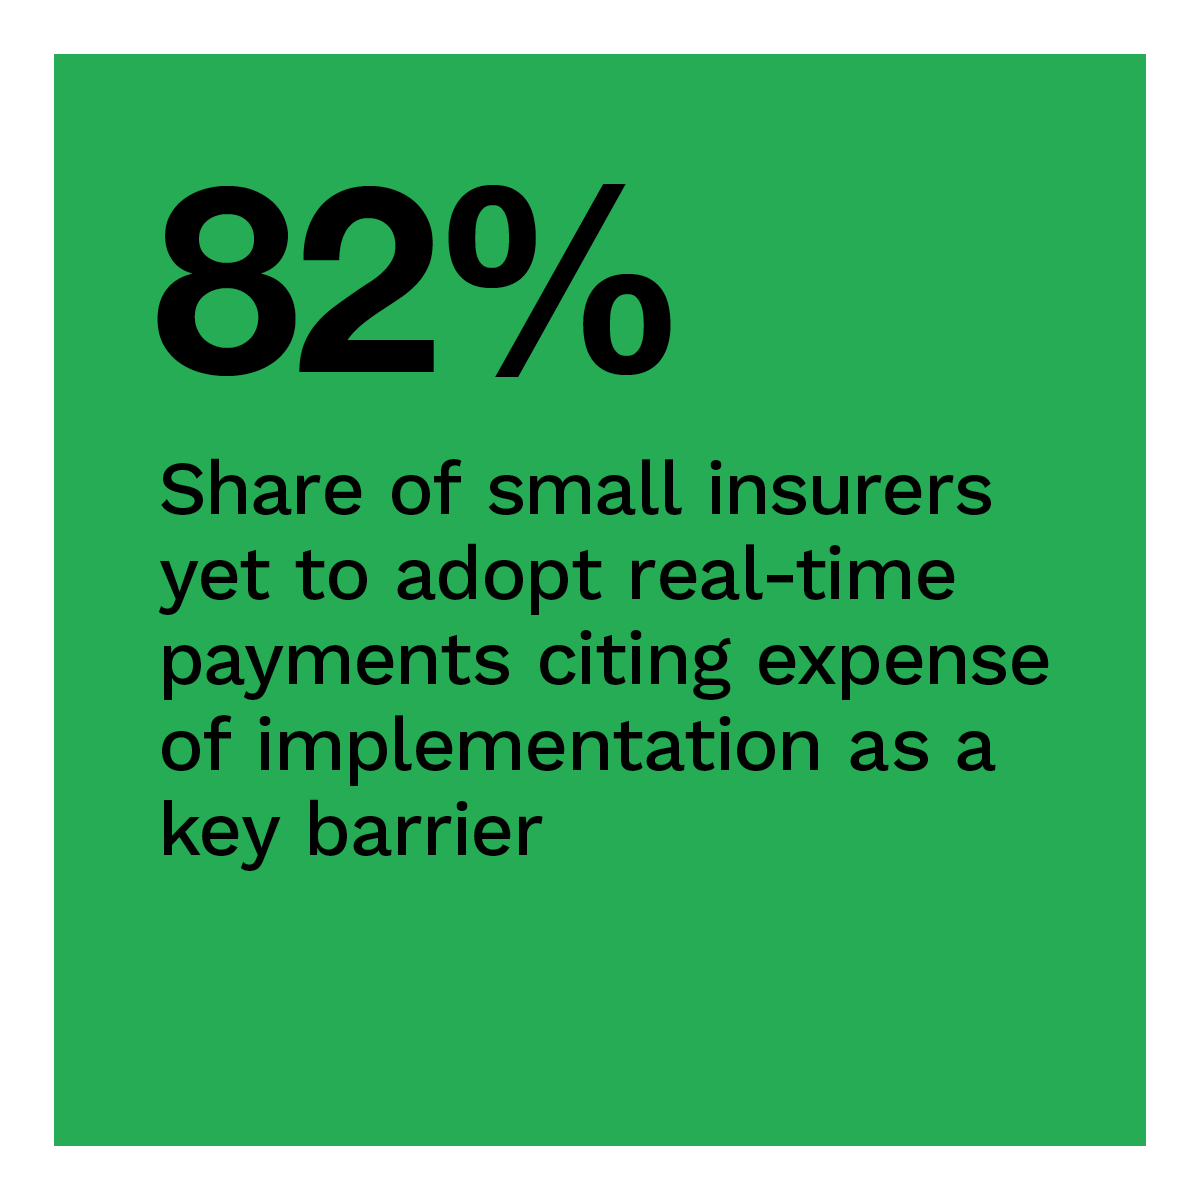 82%: Share of small insurers yet to adopt real-time payments citing expense of implementation as a key barrier